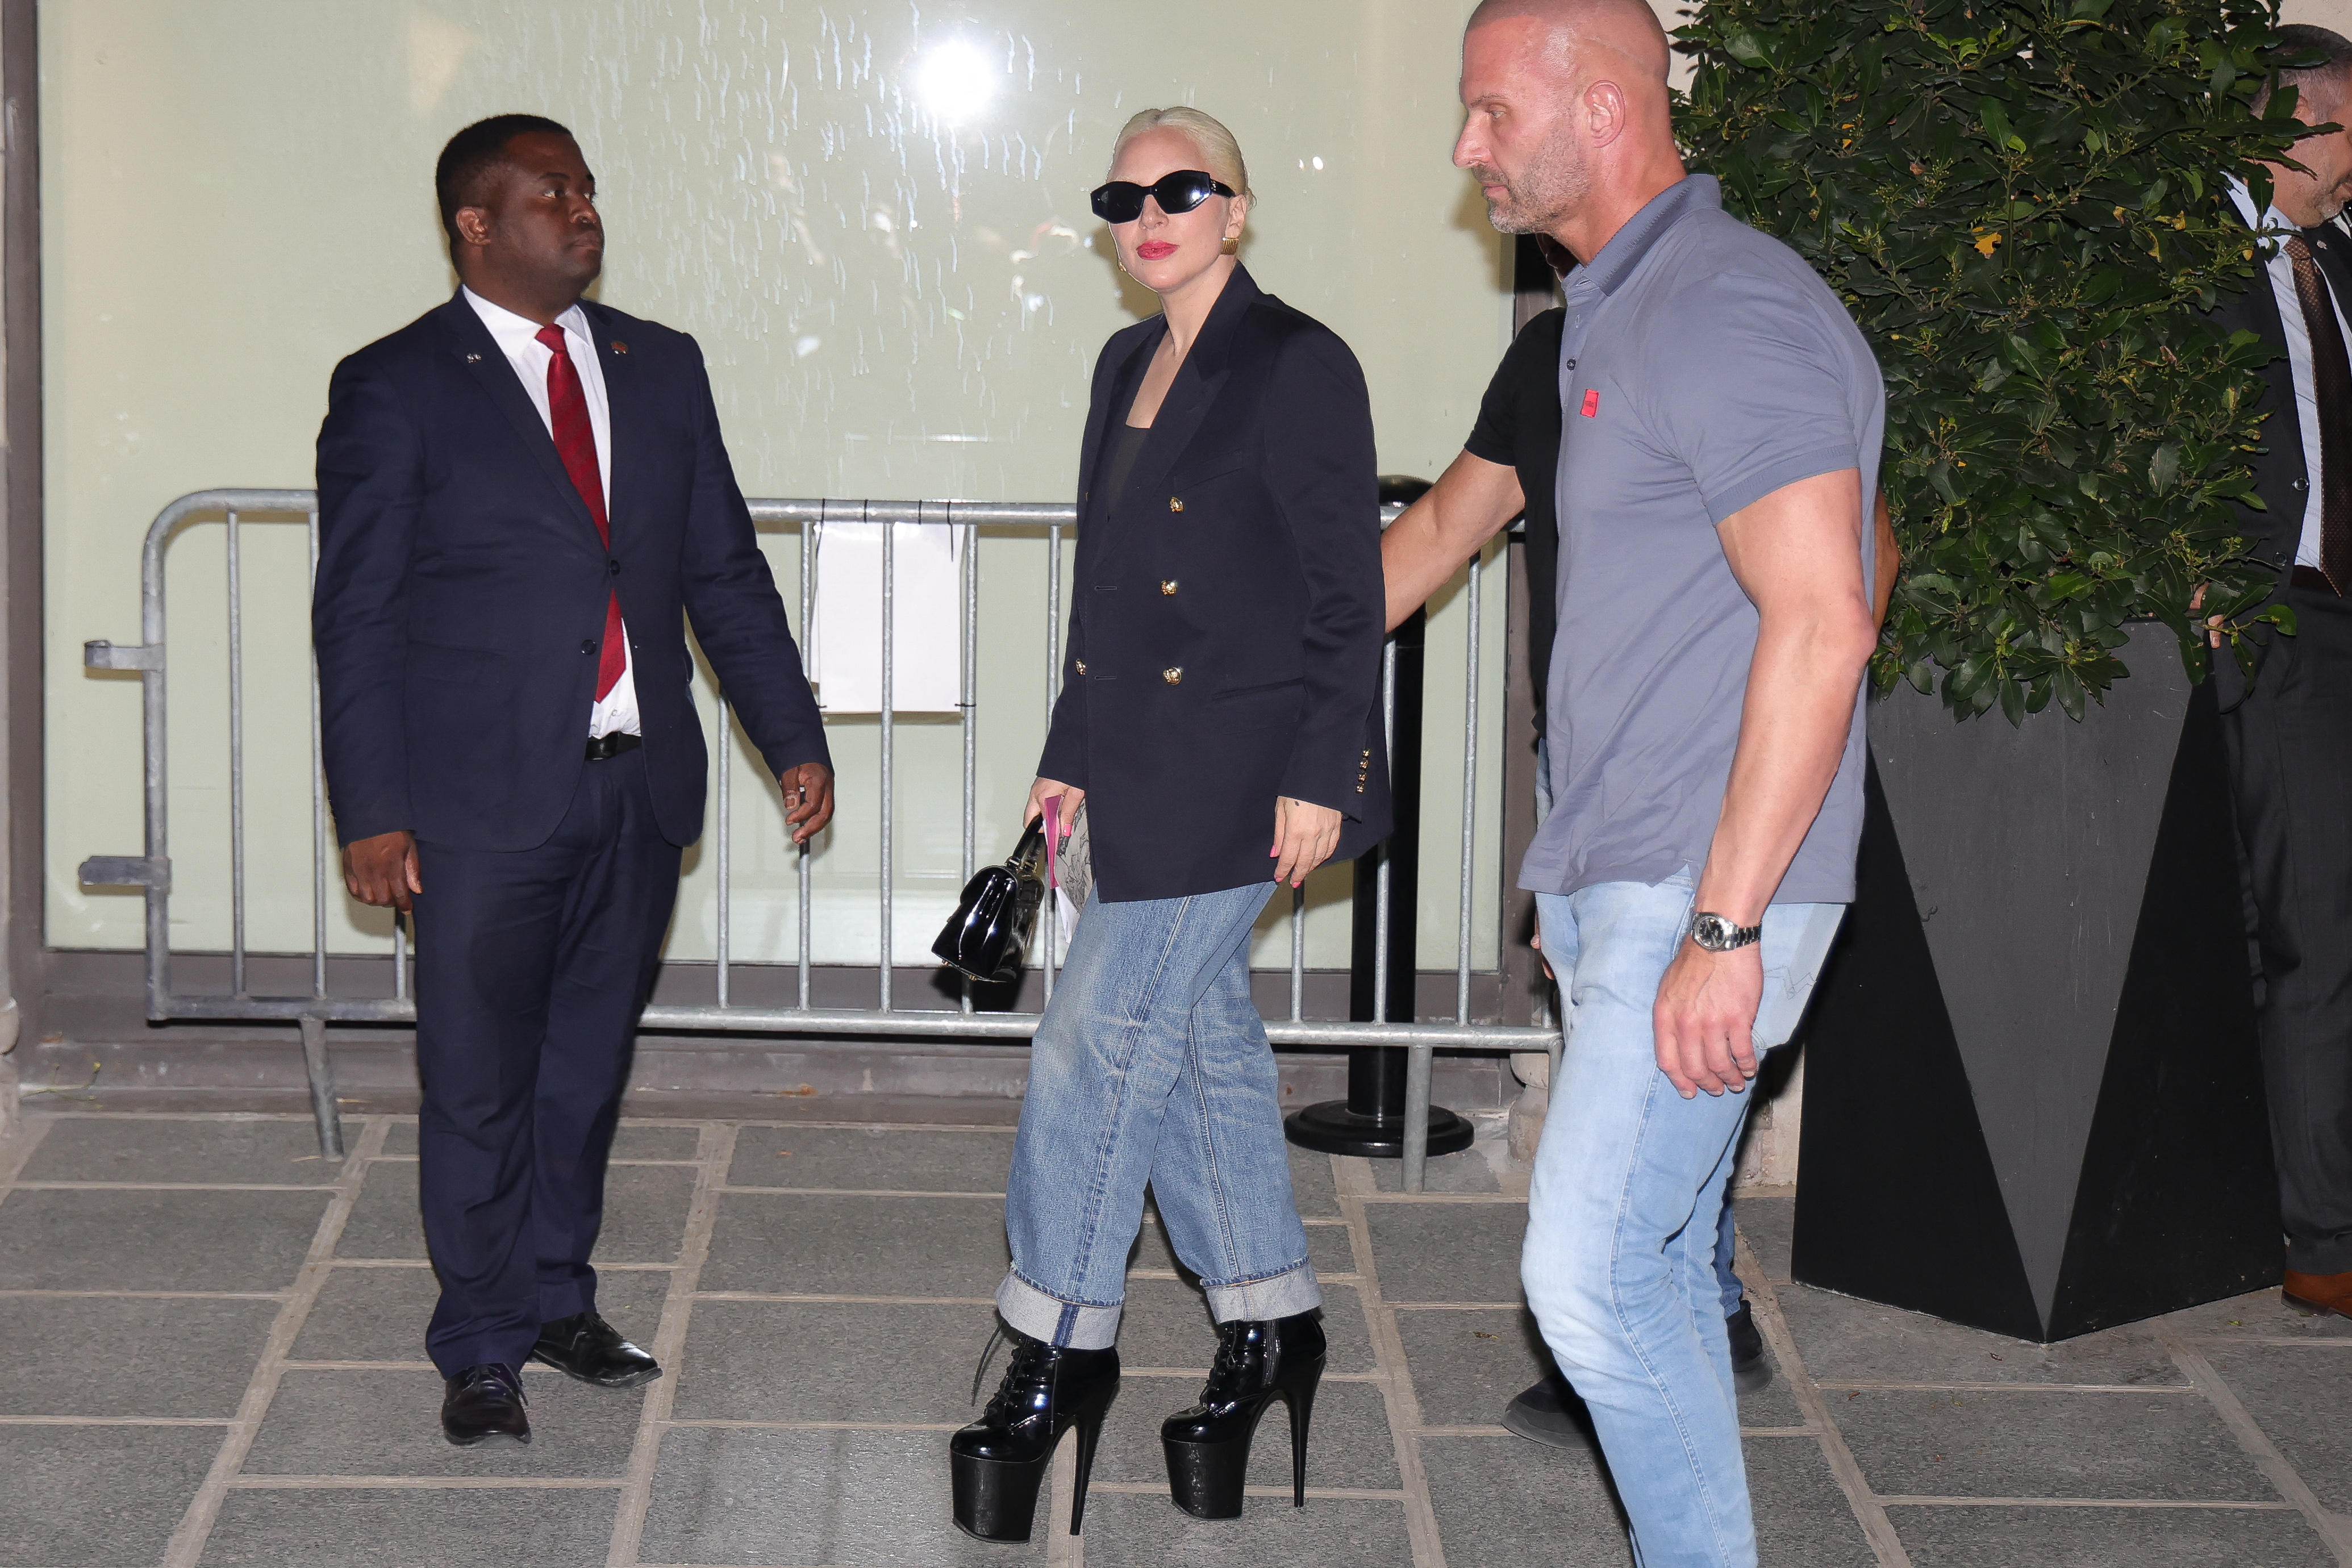 Lady Gaga, pictured outside her Paris hotel, was rumored to be performing with Celine Dion (not pictured)